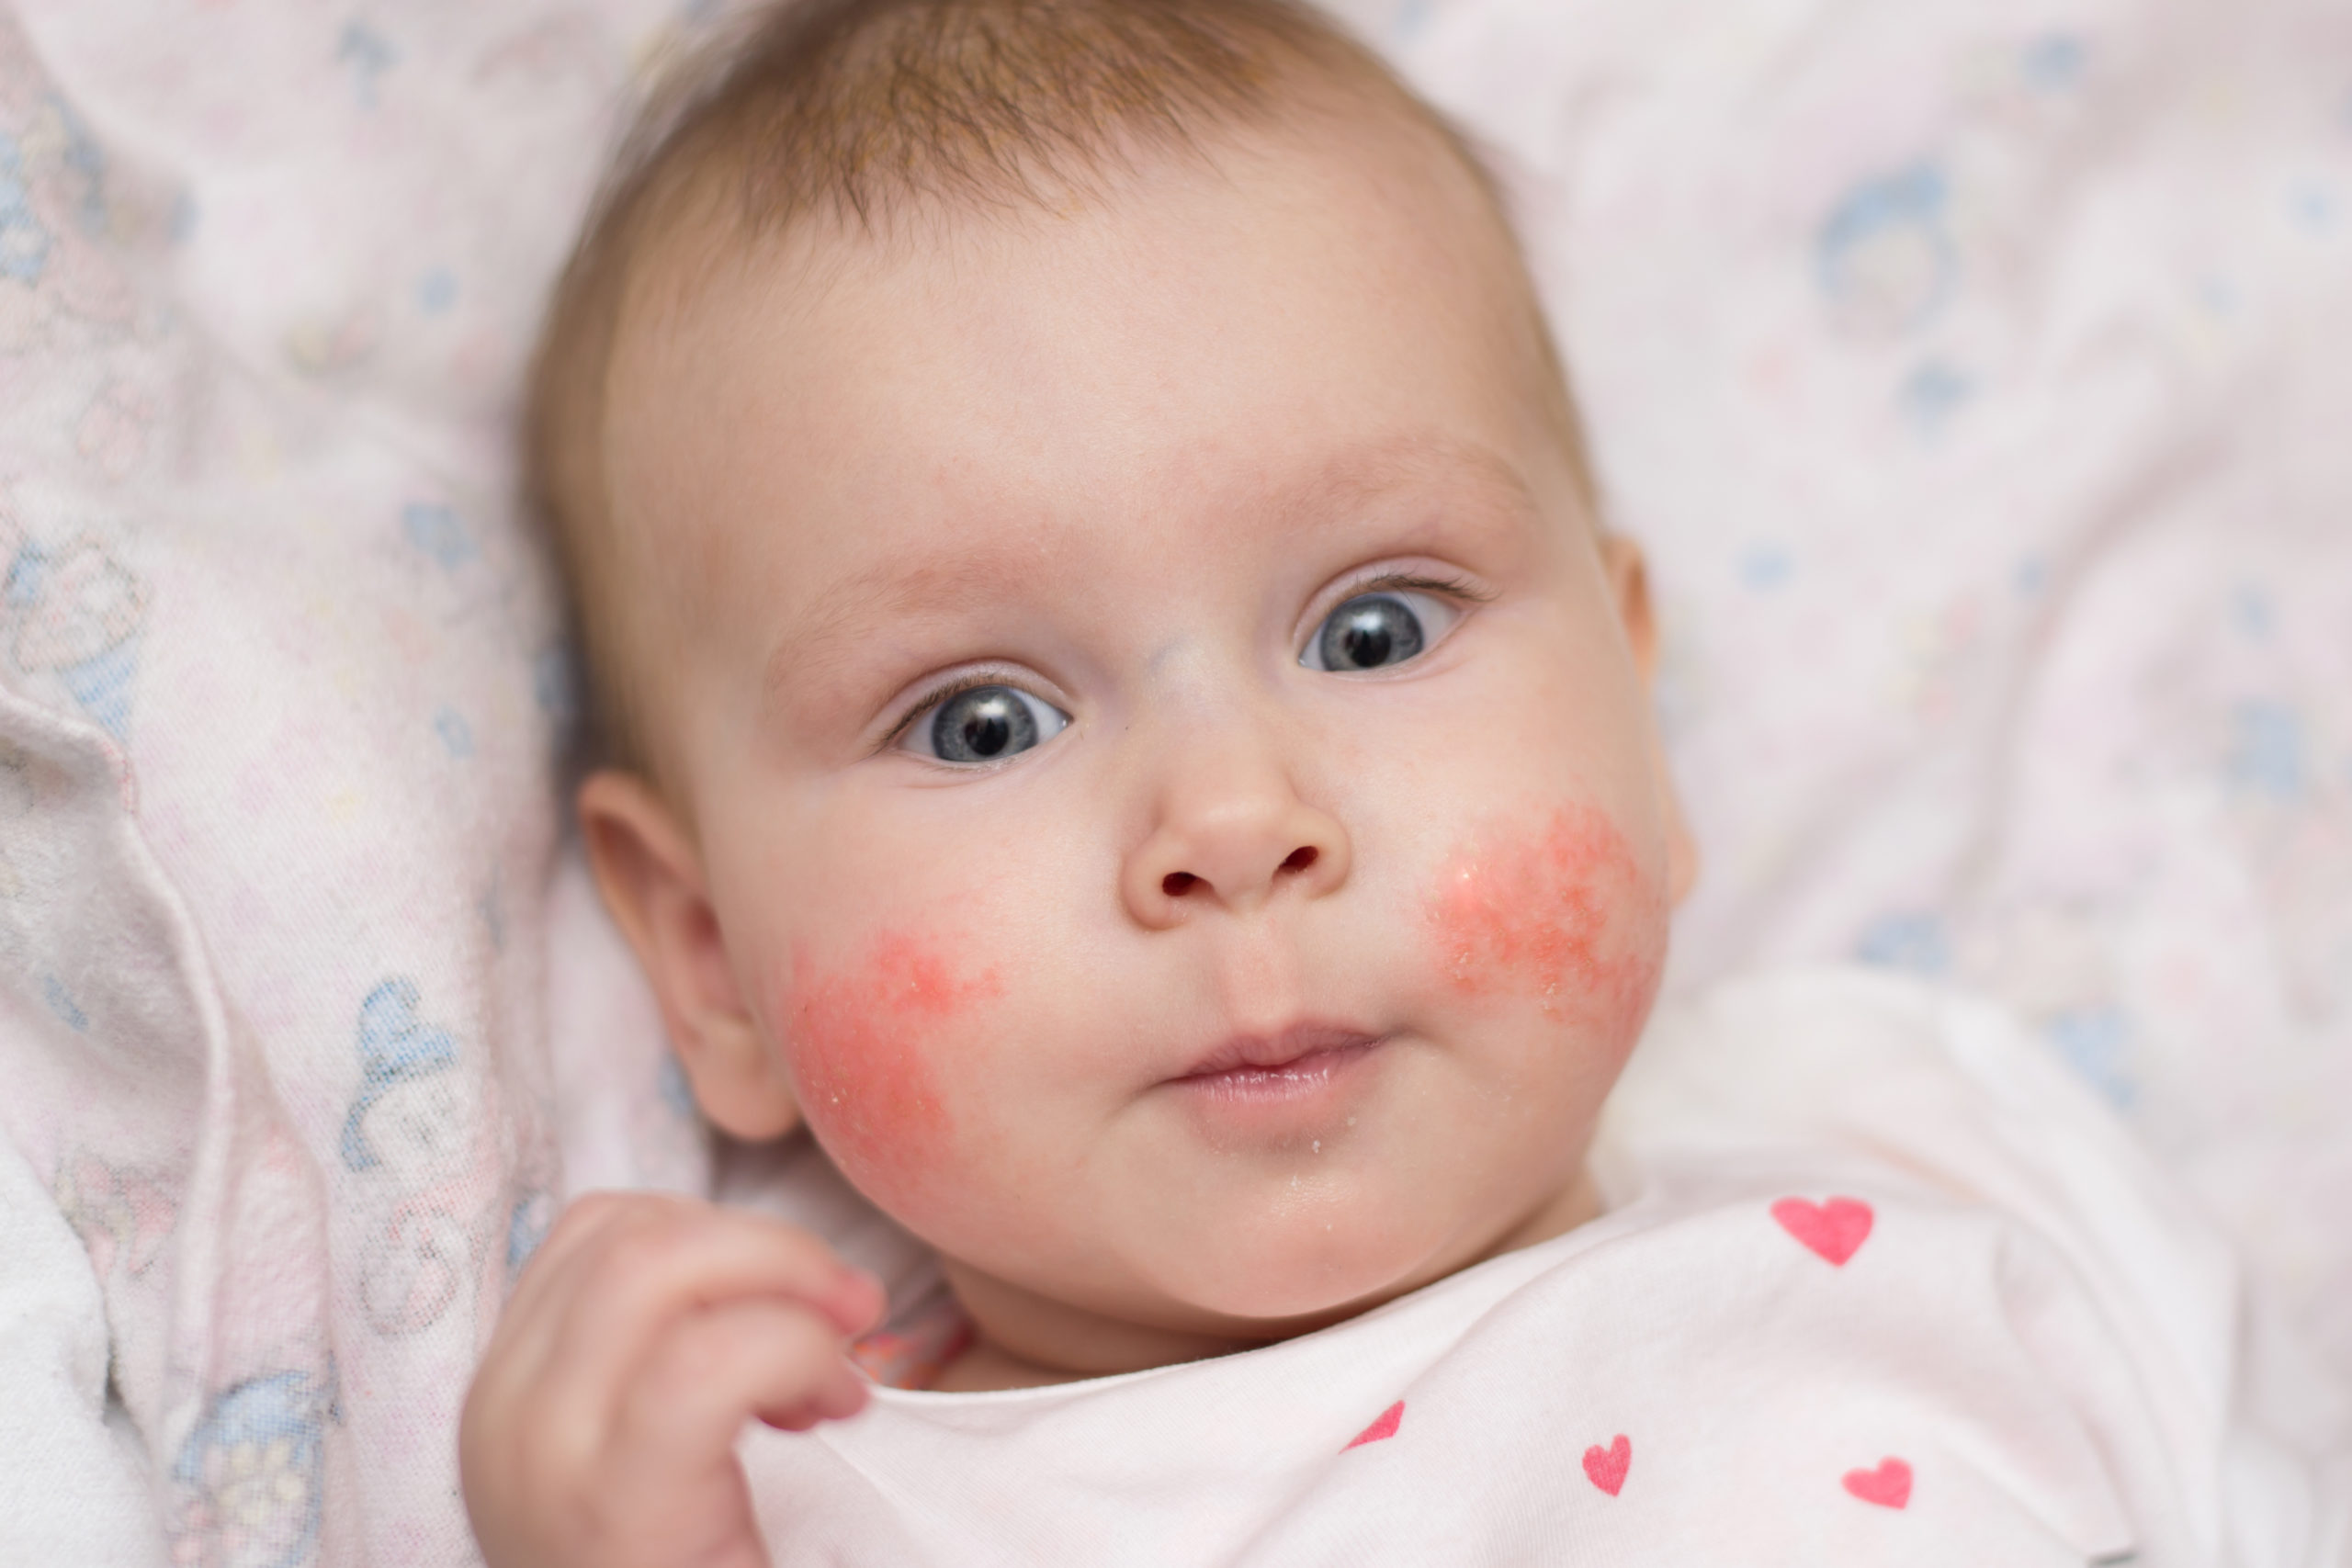 Image of a baby with dry/scaly rash on her cheeks